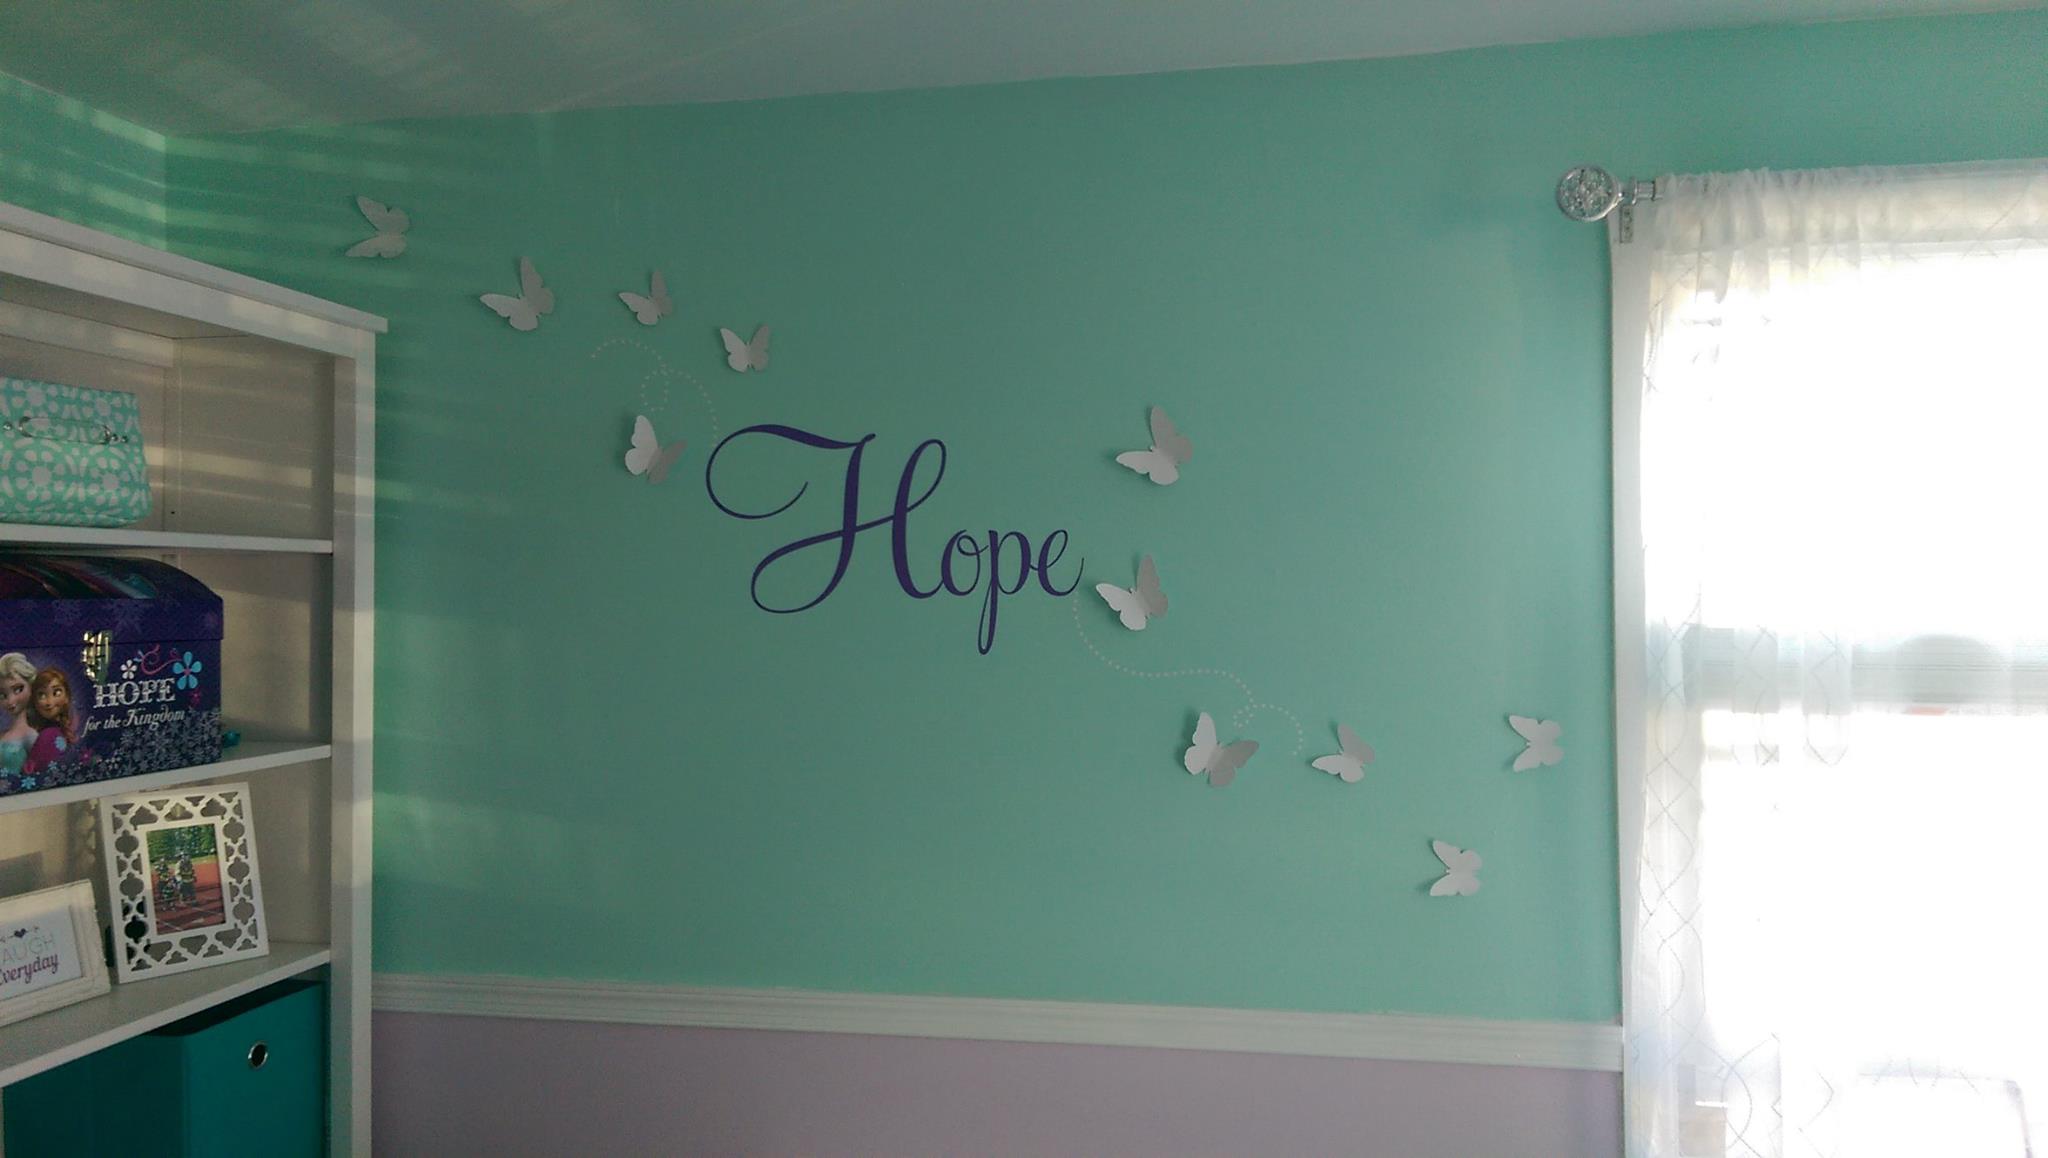  Vinyl wall art donated by Lola Decor and paper butterflies donated by Magical Whimsy. (both on Etsy) 